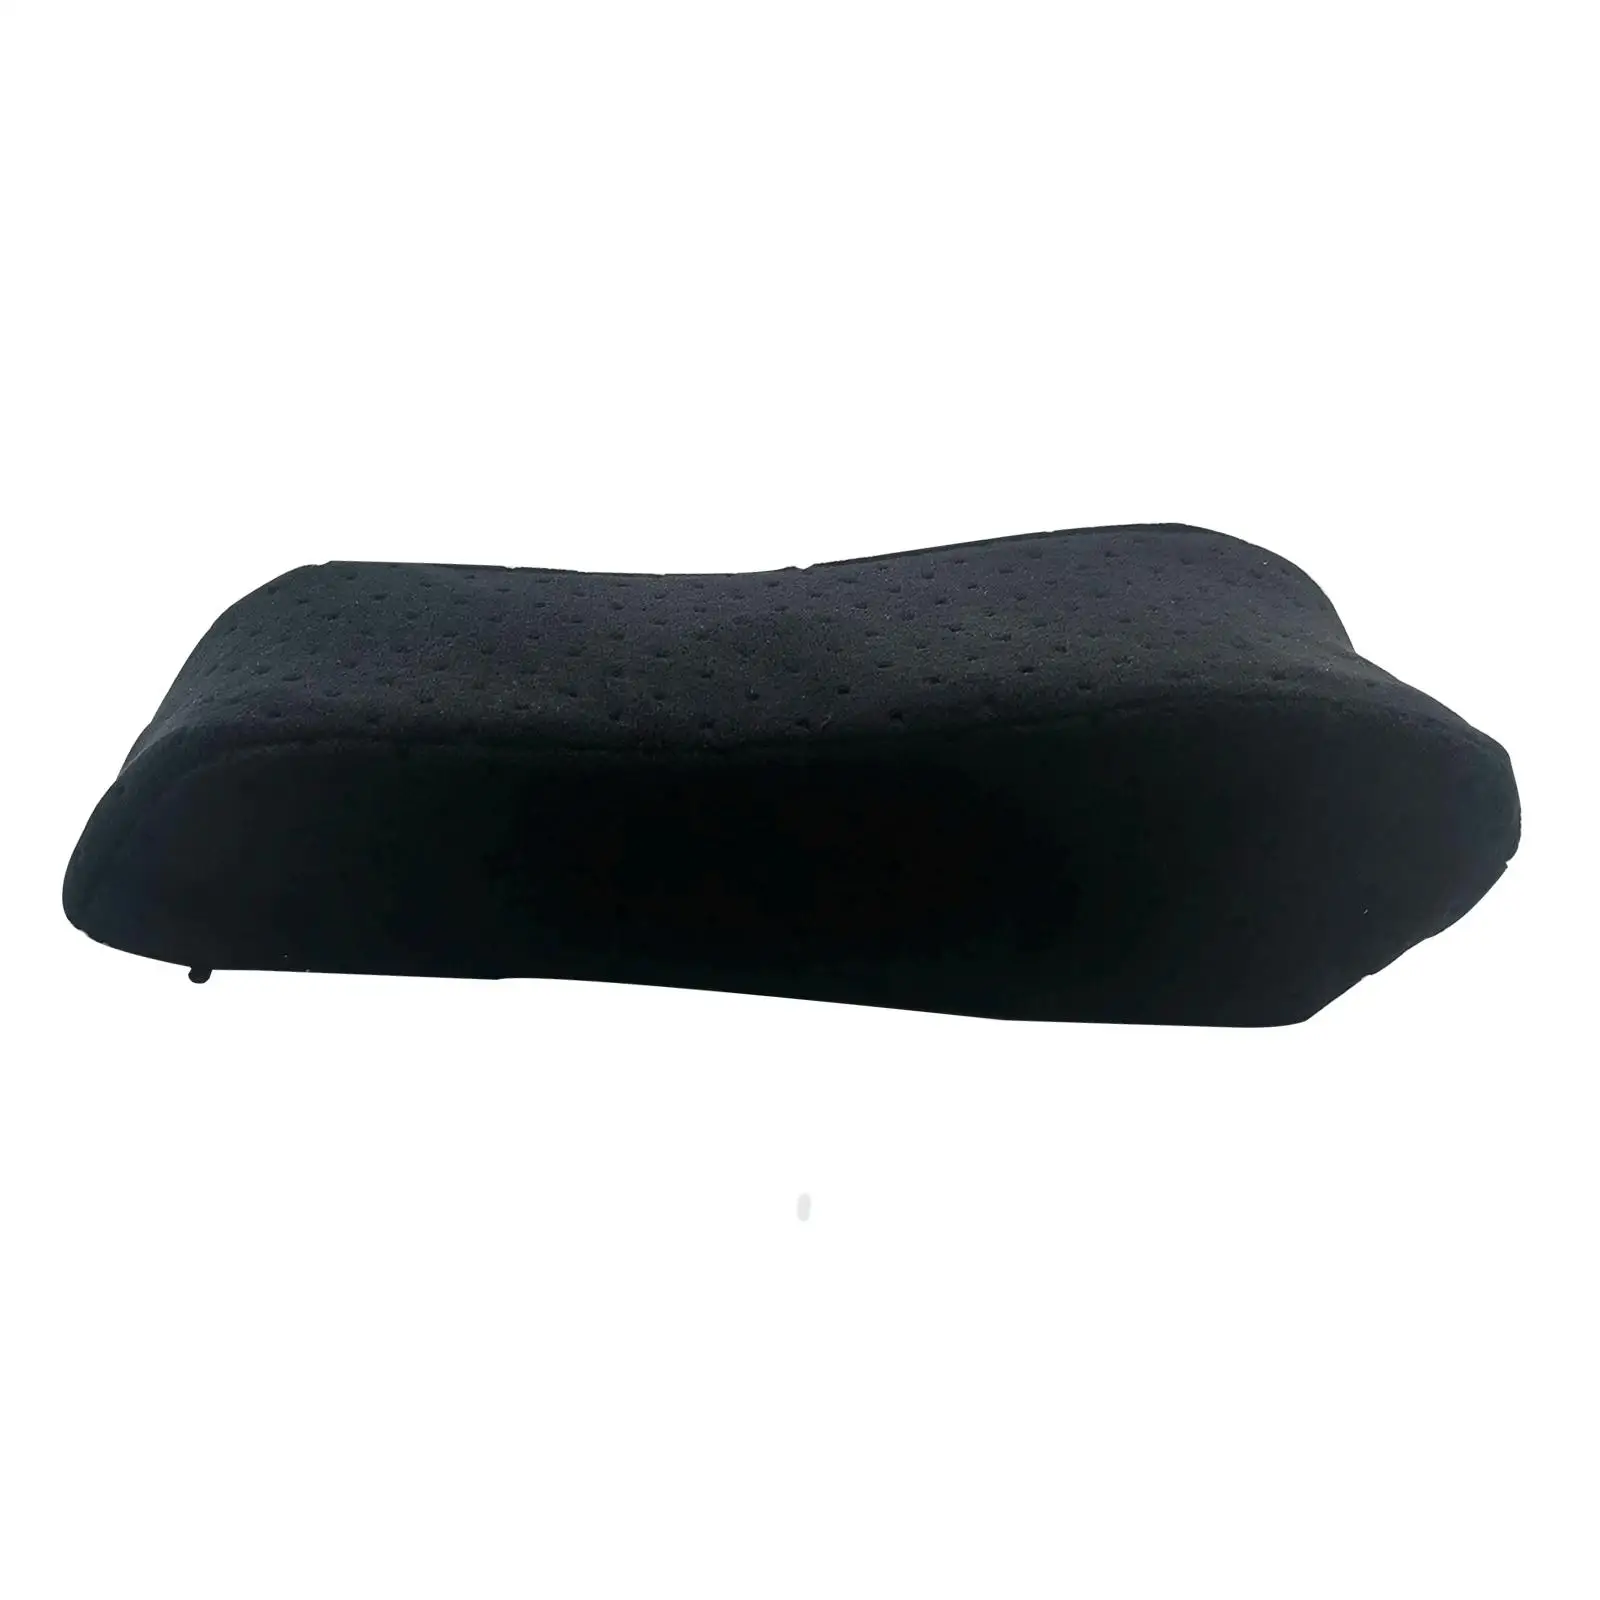 Armrest Pads Comfy Washable Velvet Arm Rest Pillow Support Cushion for Chairs